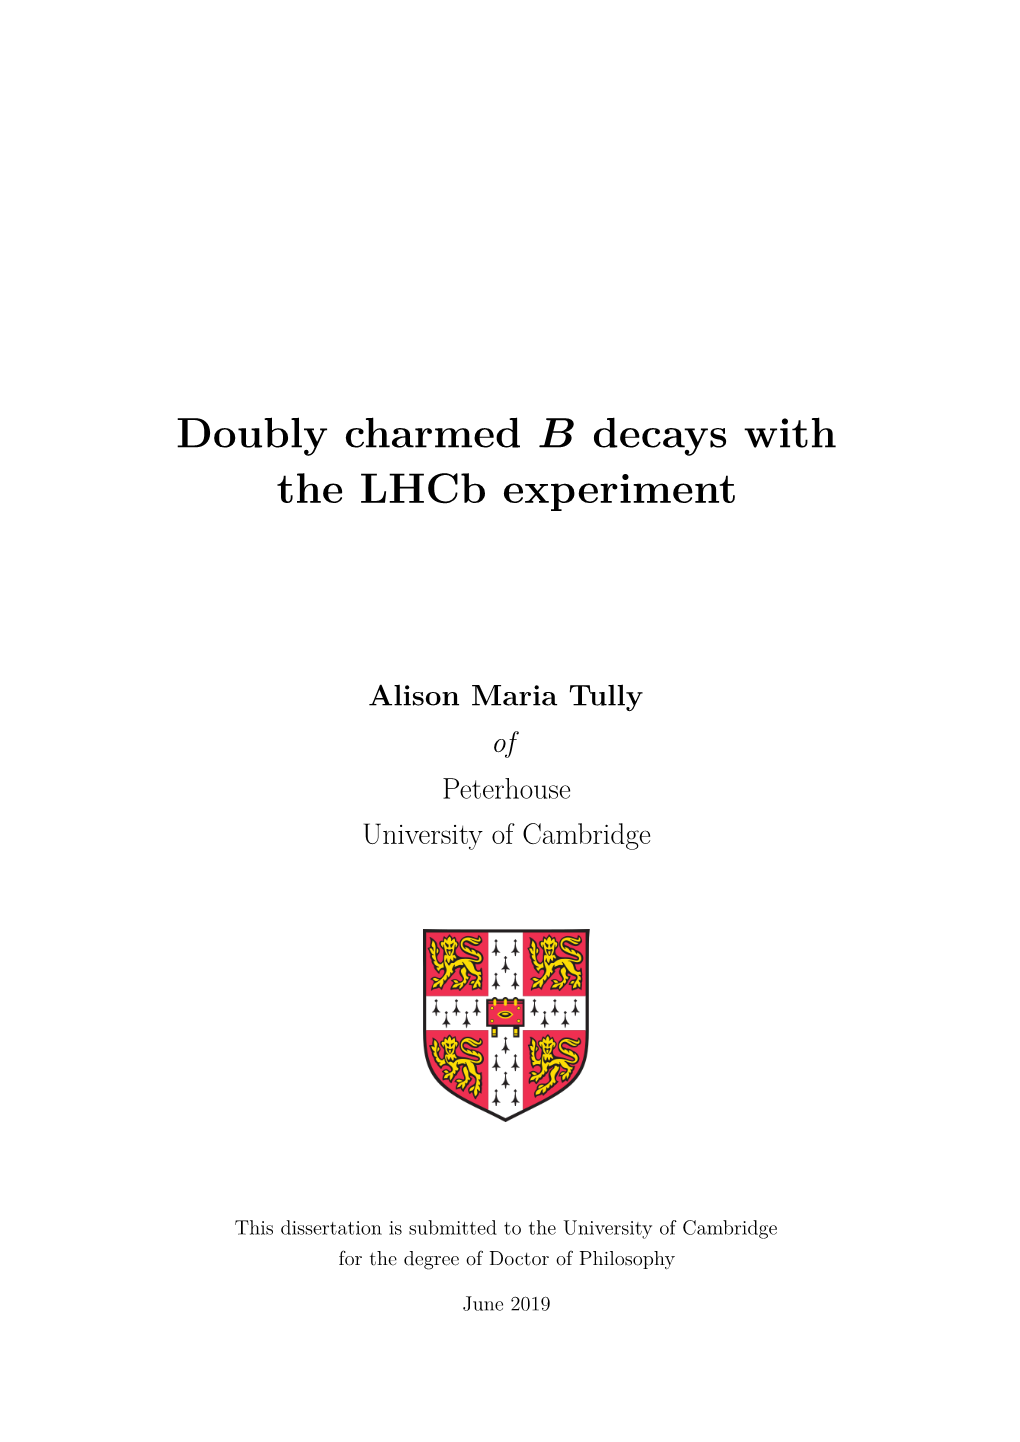 Thesis Documents Two Studies of CP Violation with Doubly Charmed B Decays